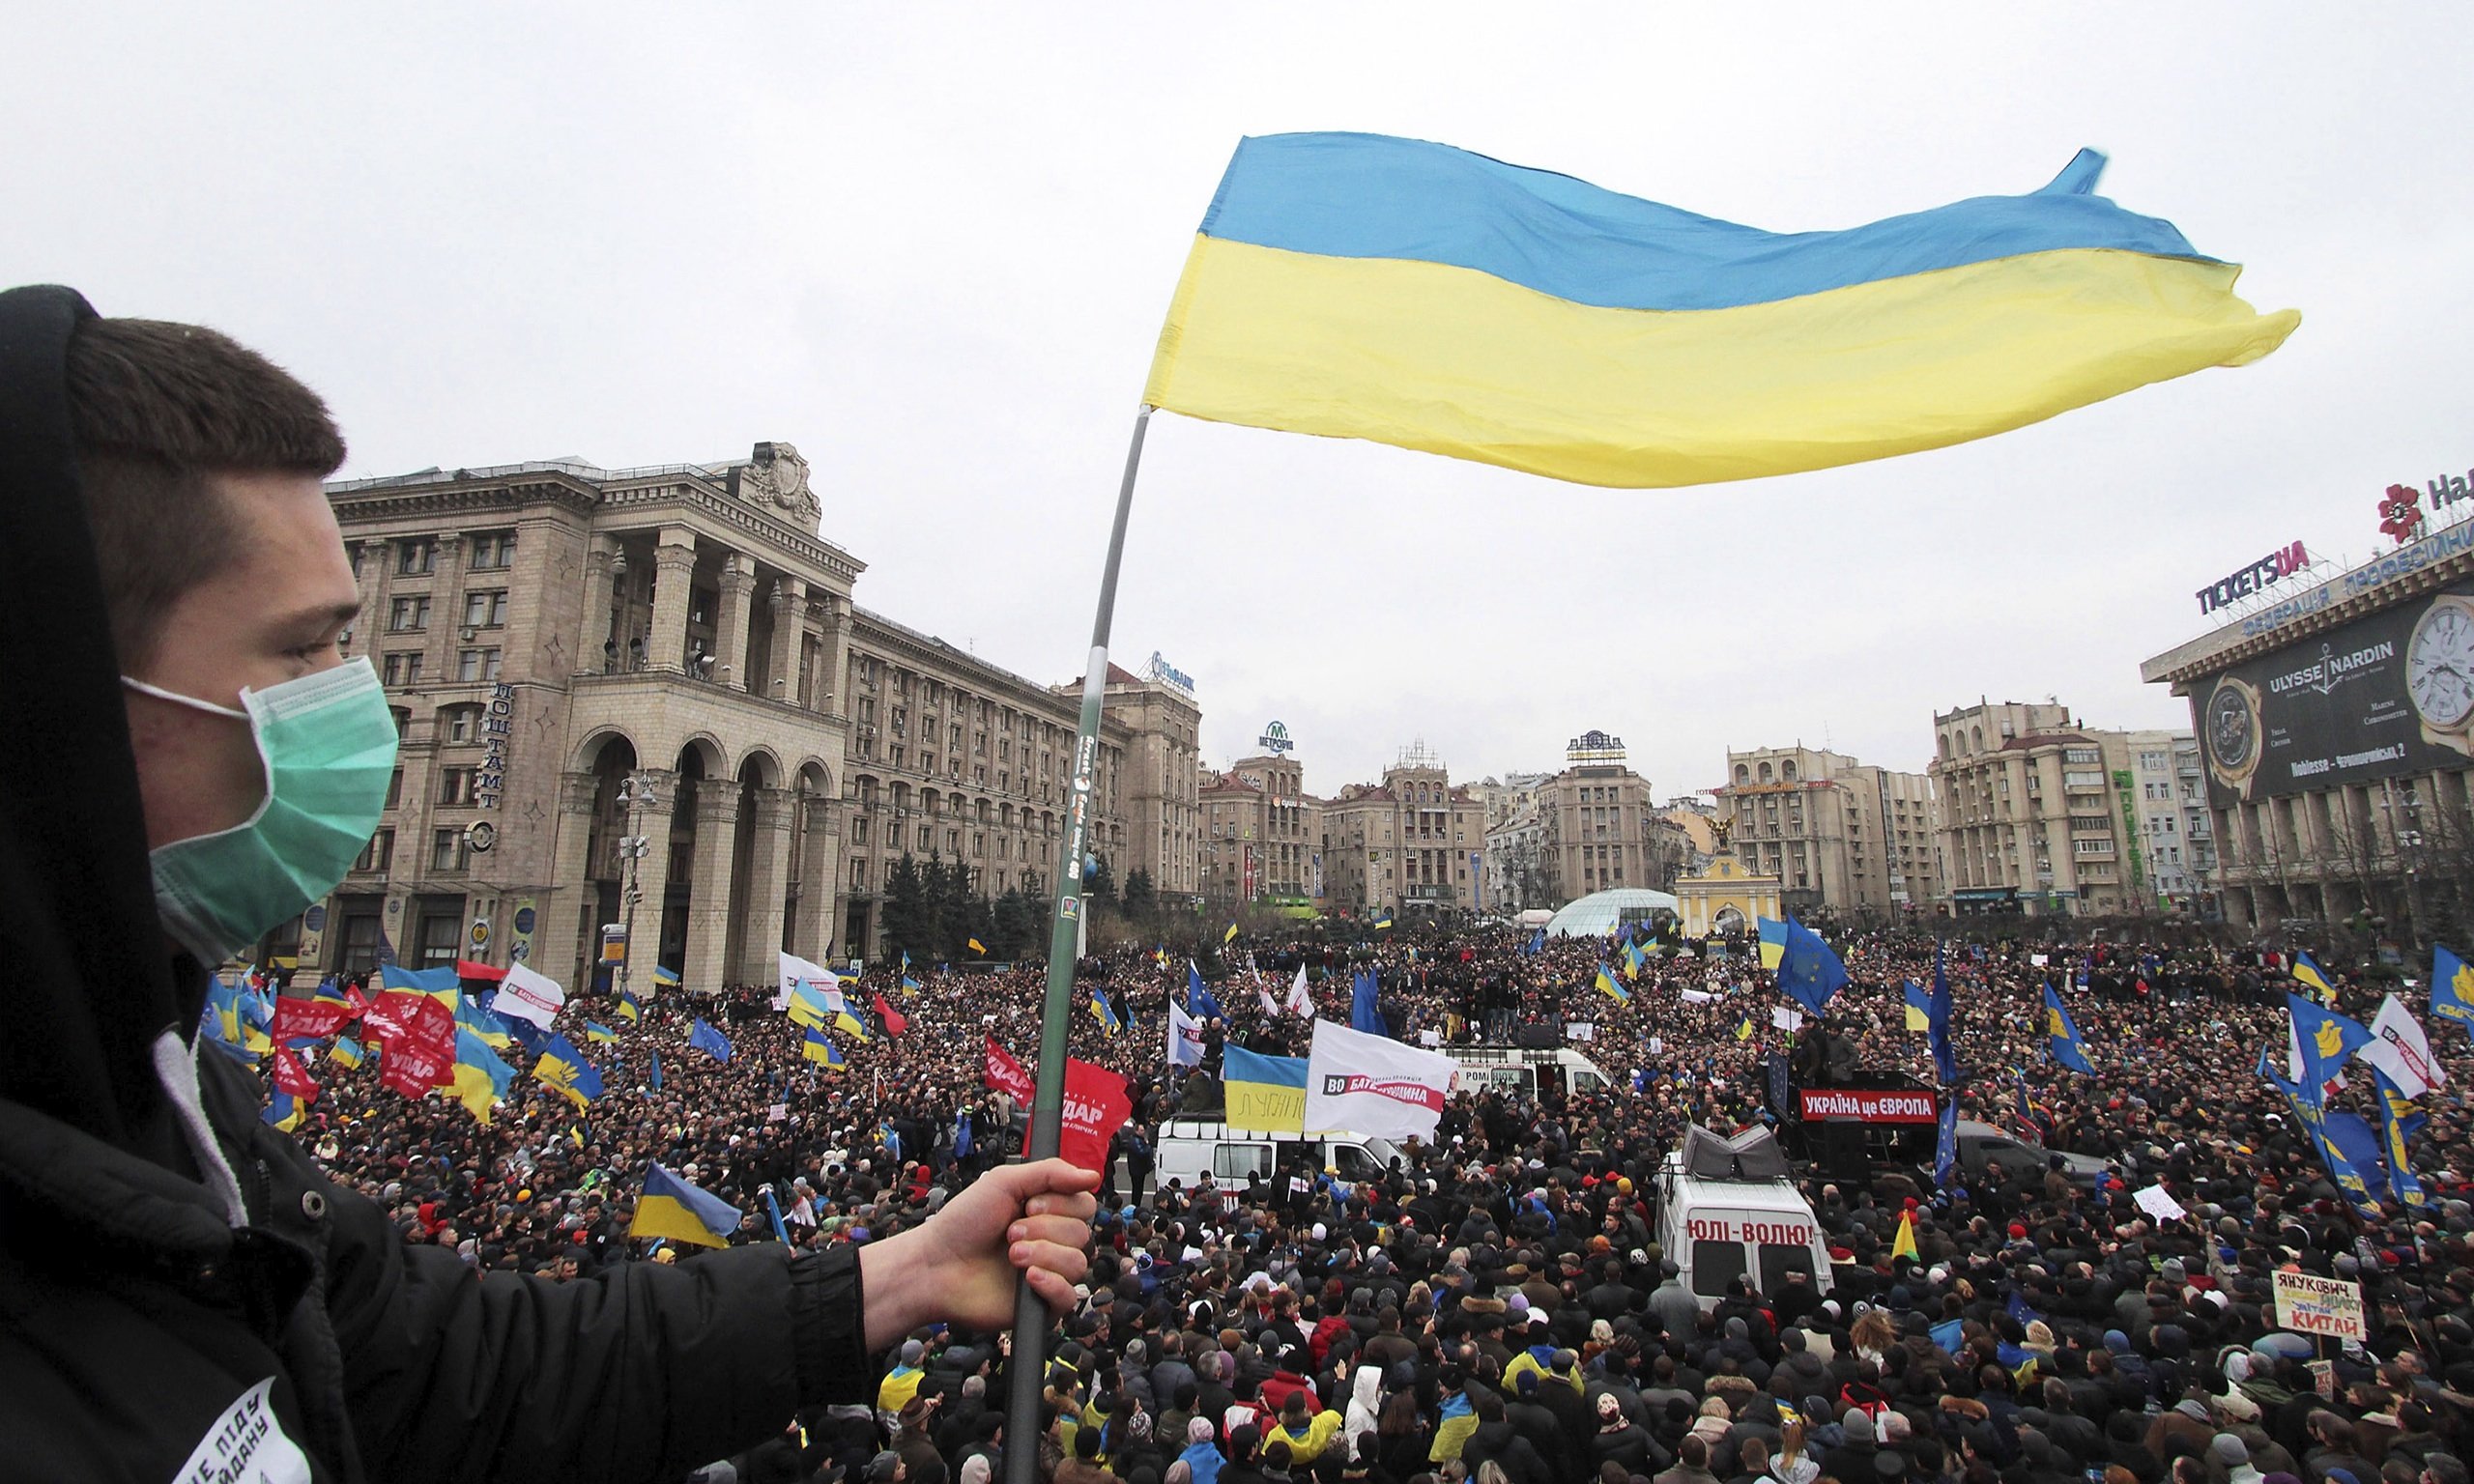 Ukrainian protests show the European Union still offers hope to some